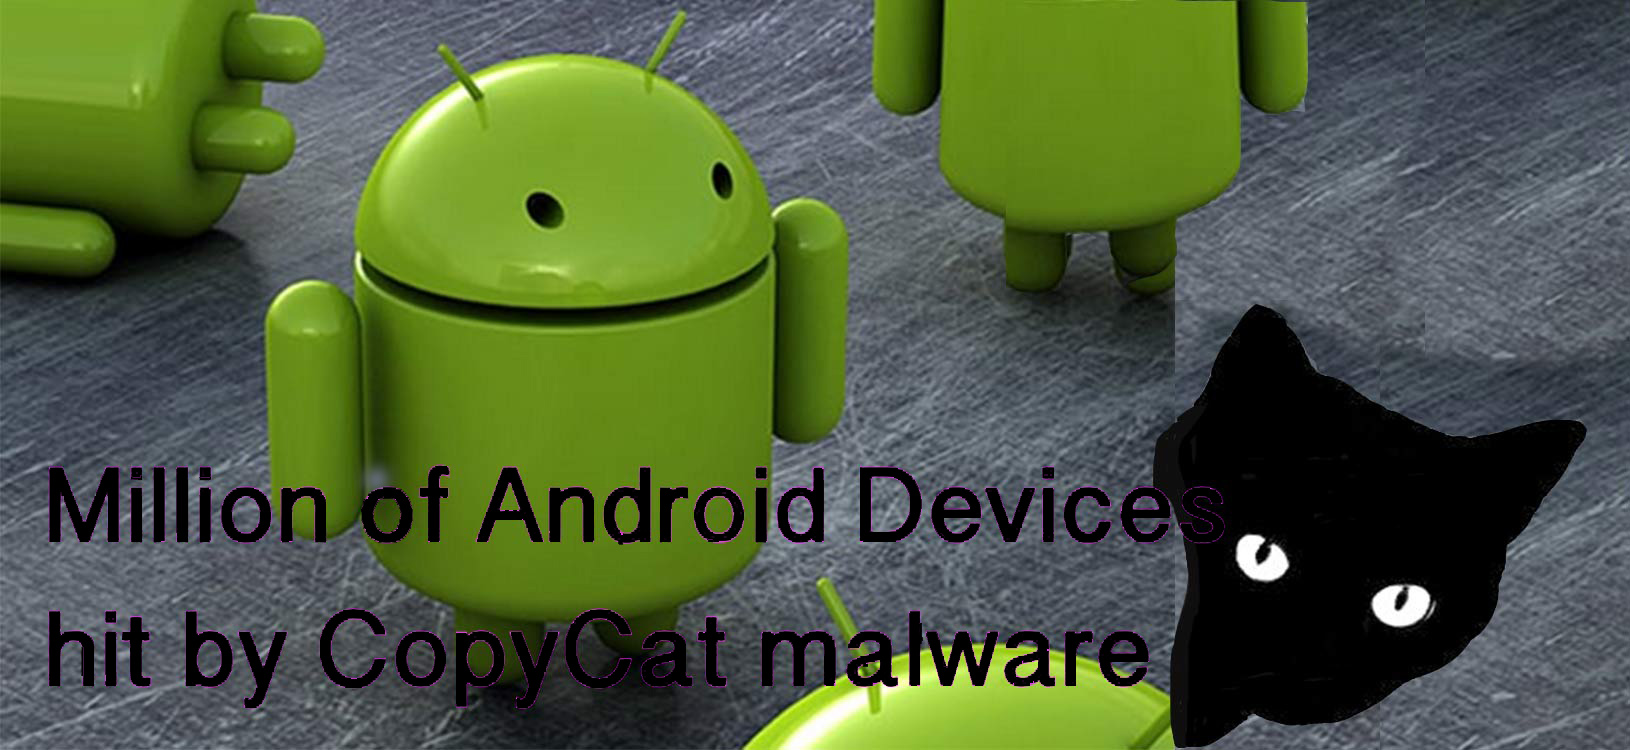 14 Million Android Smartphones are Infected by CopyCat Malware